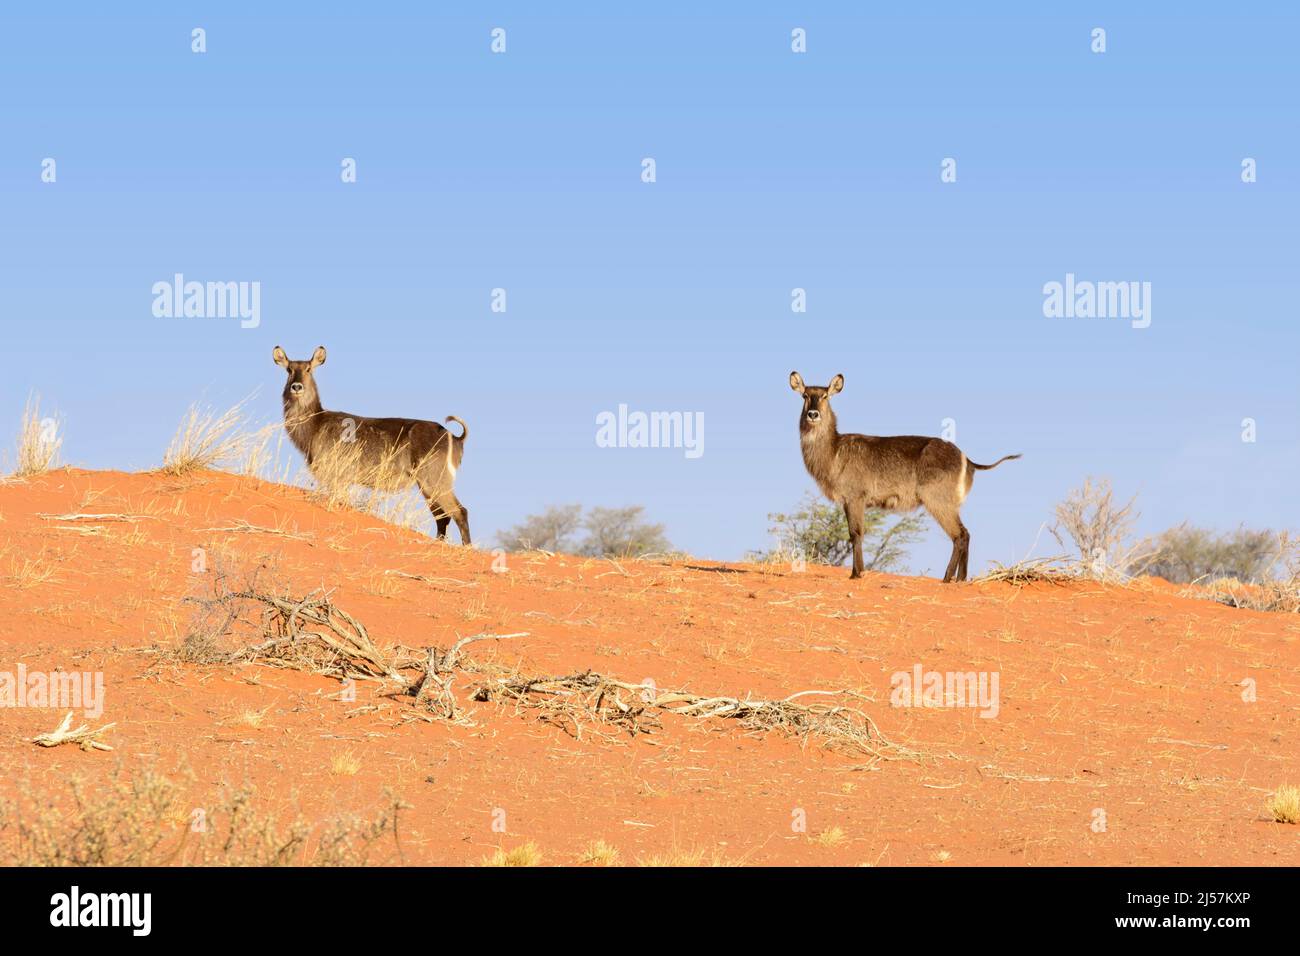 Two waterbucks (Kobus ellipsiprymnus) stand on a red sand dune with a clear blue sky in the Kalahari Desert, Hardap Region, Namibia, Southwest Africa Stock Photo